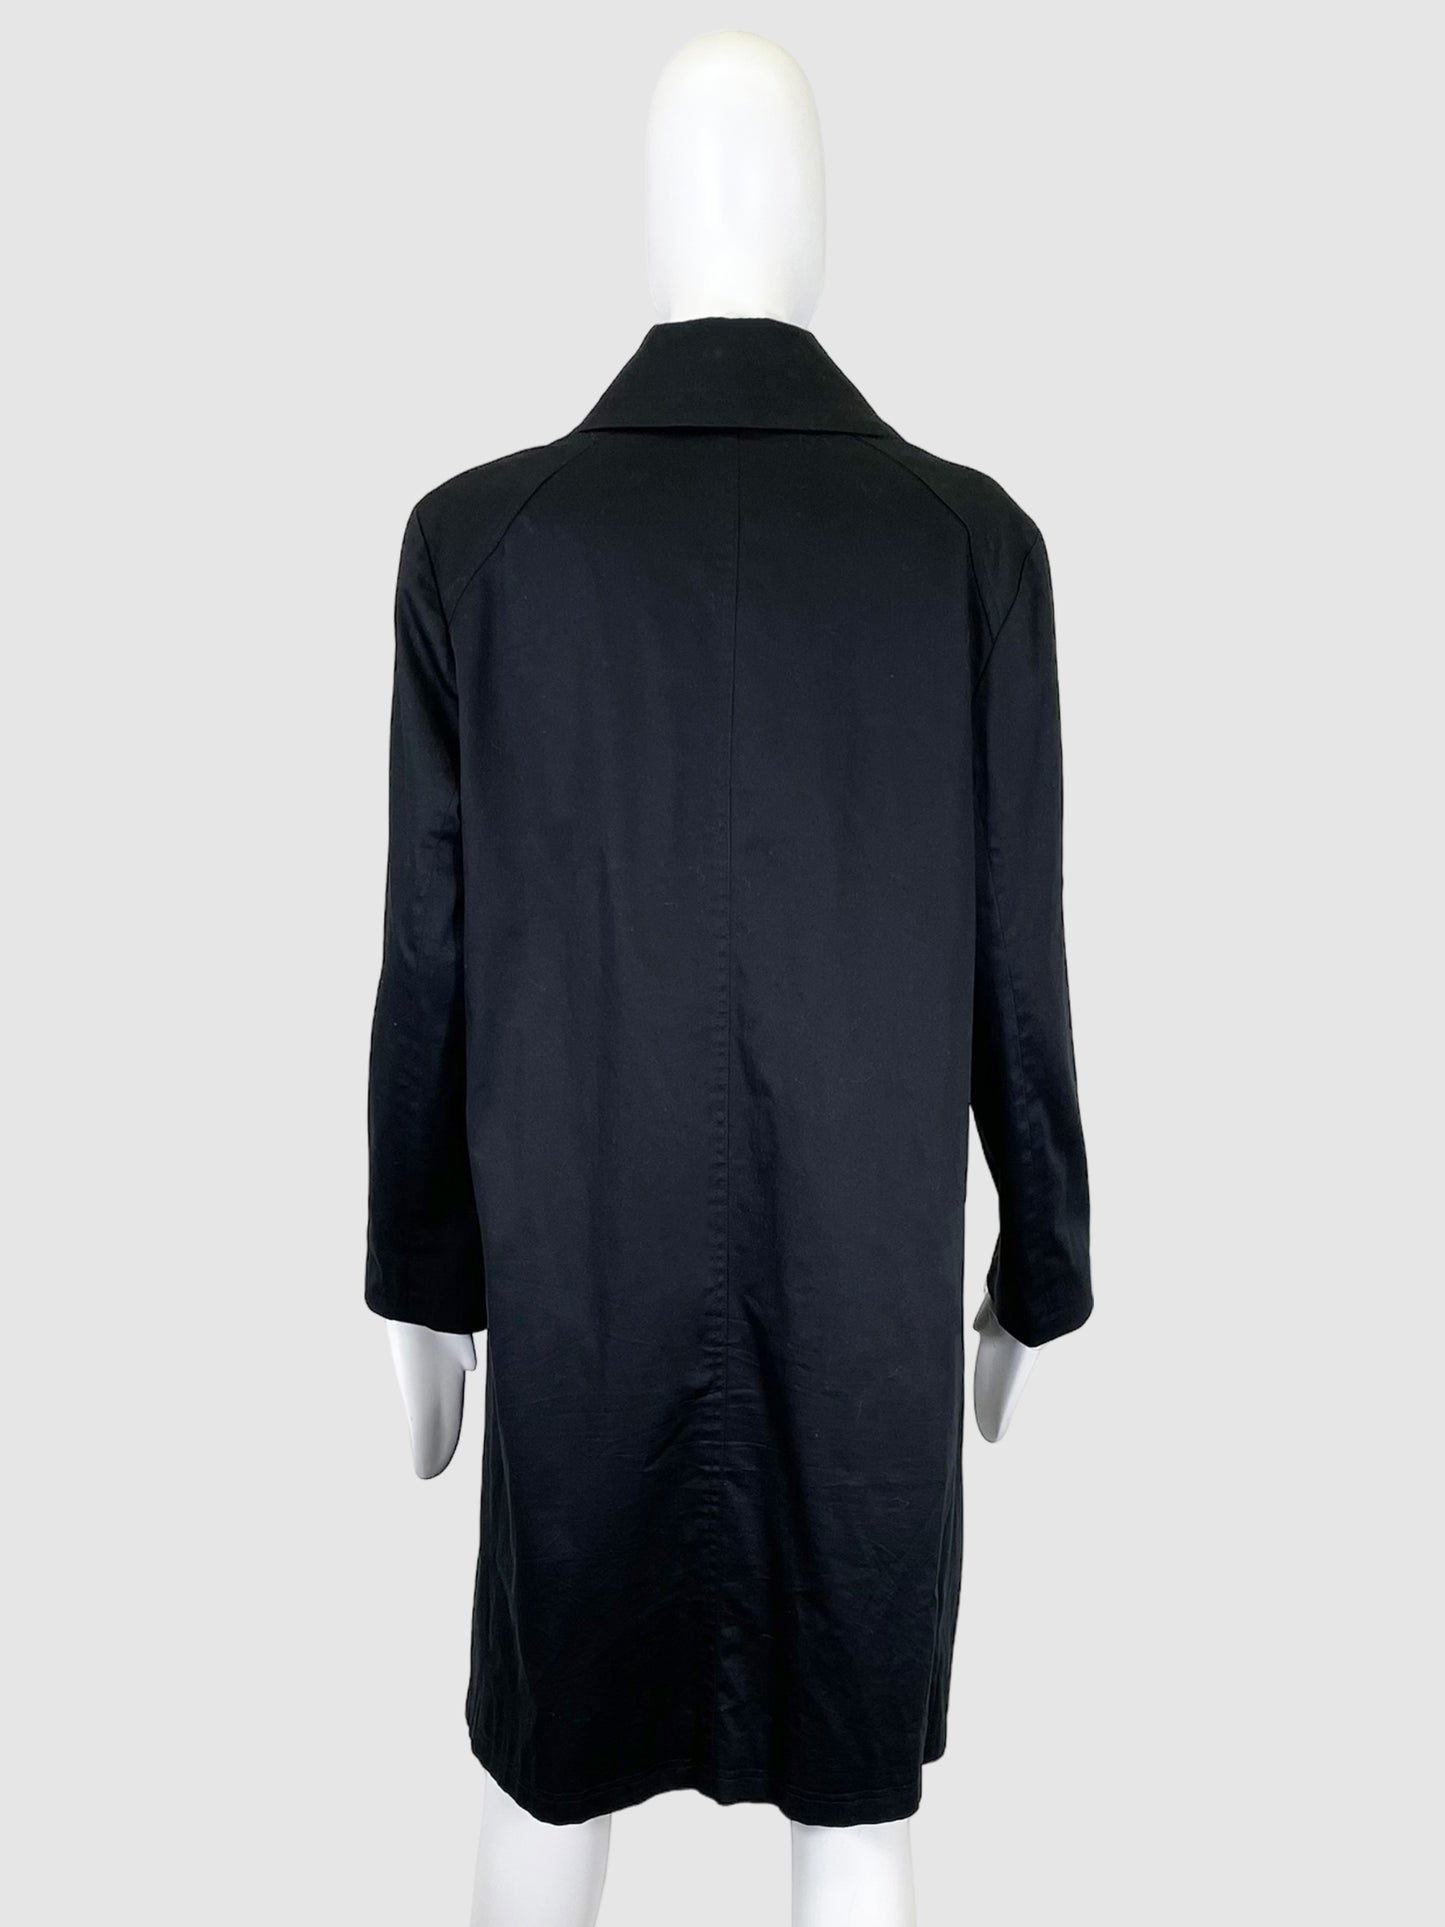 Single-Breasted Trench Coat - Size 12